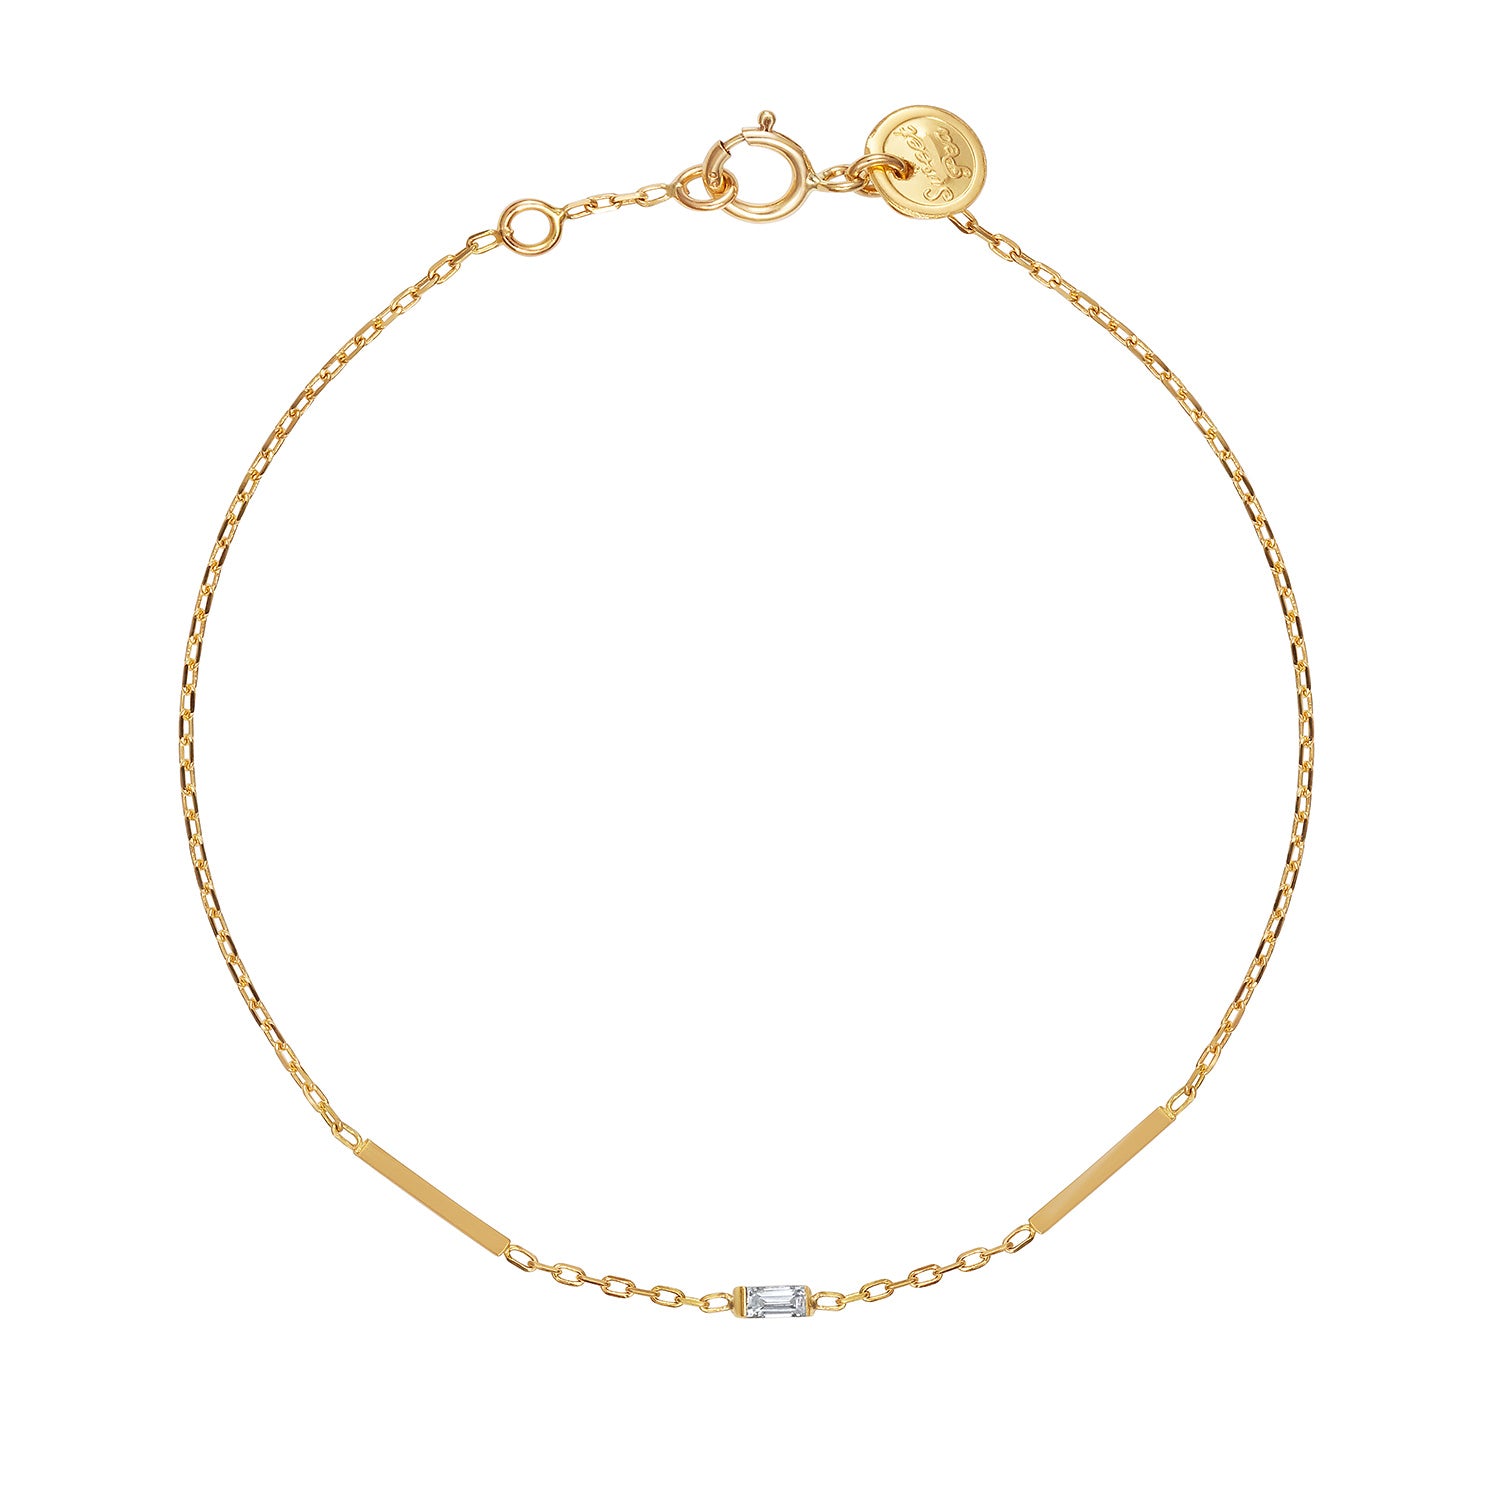 18ct yellow gold fine chain bracelet with Diamond baguette and two bars.